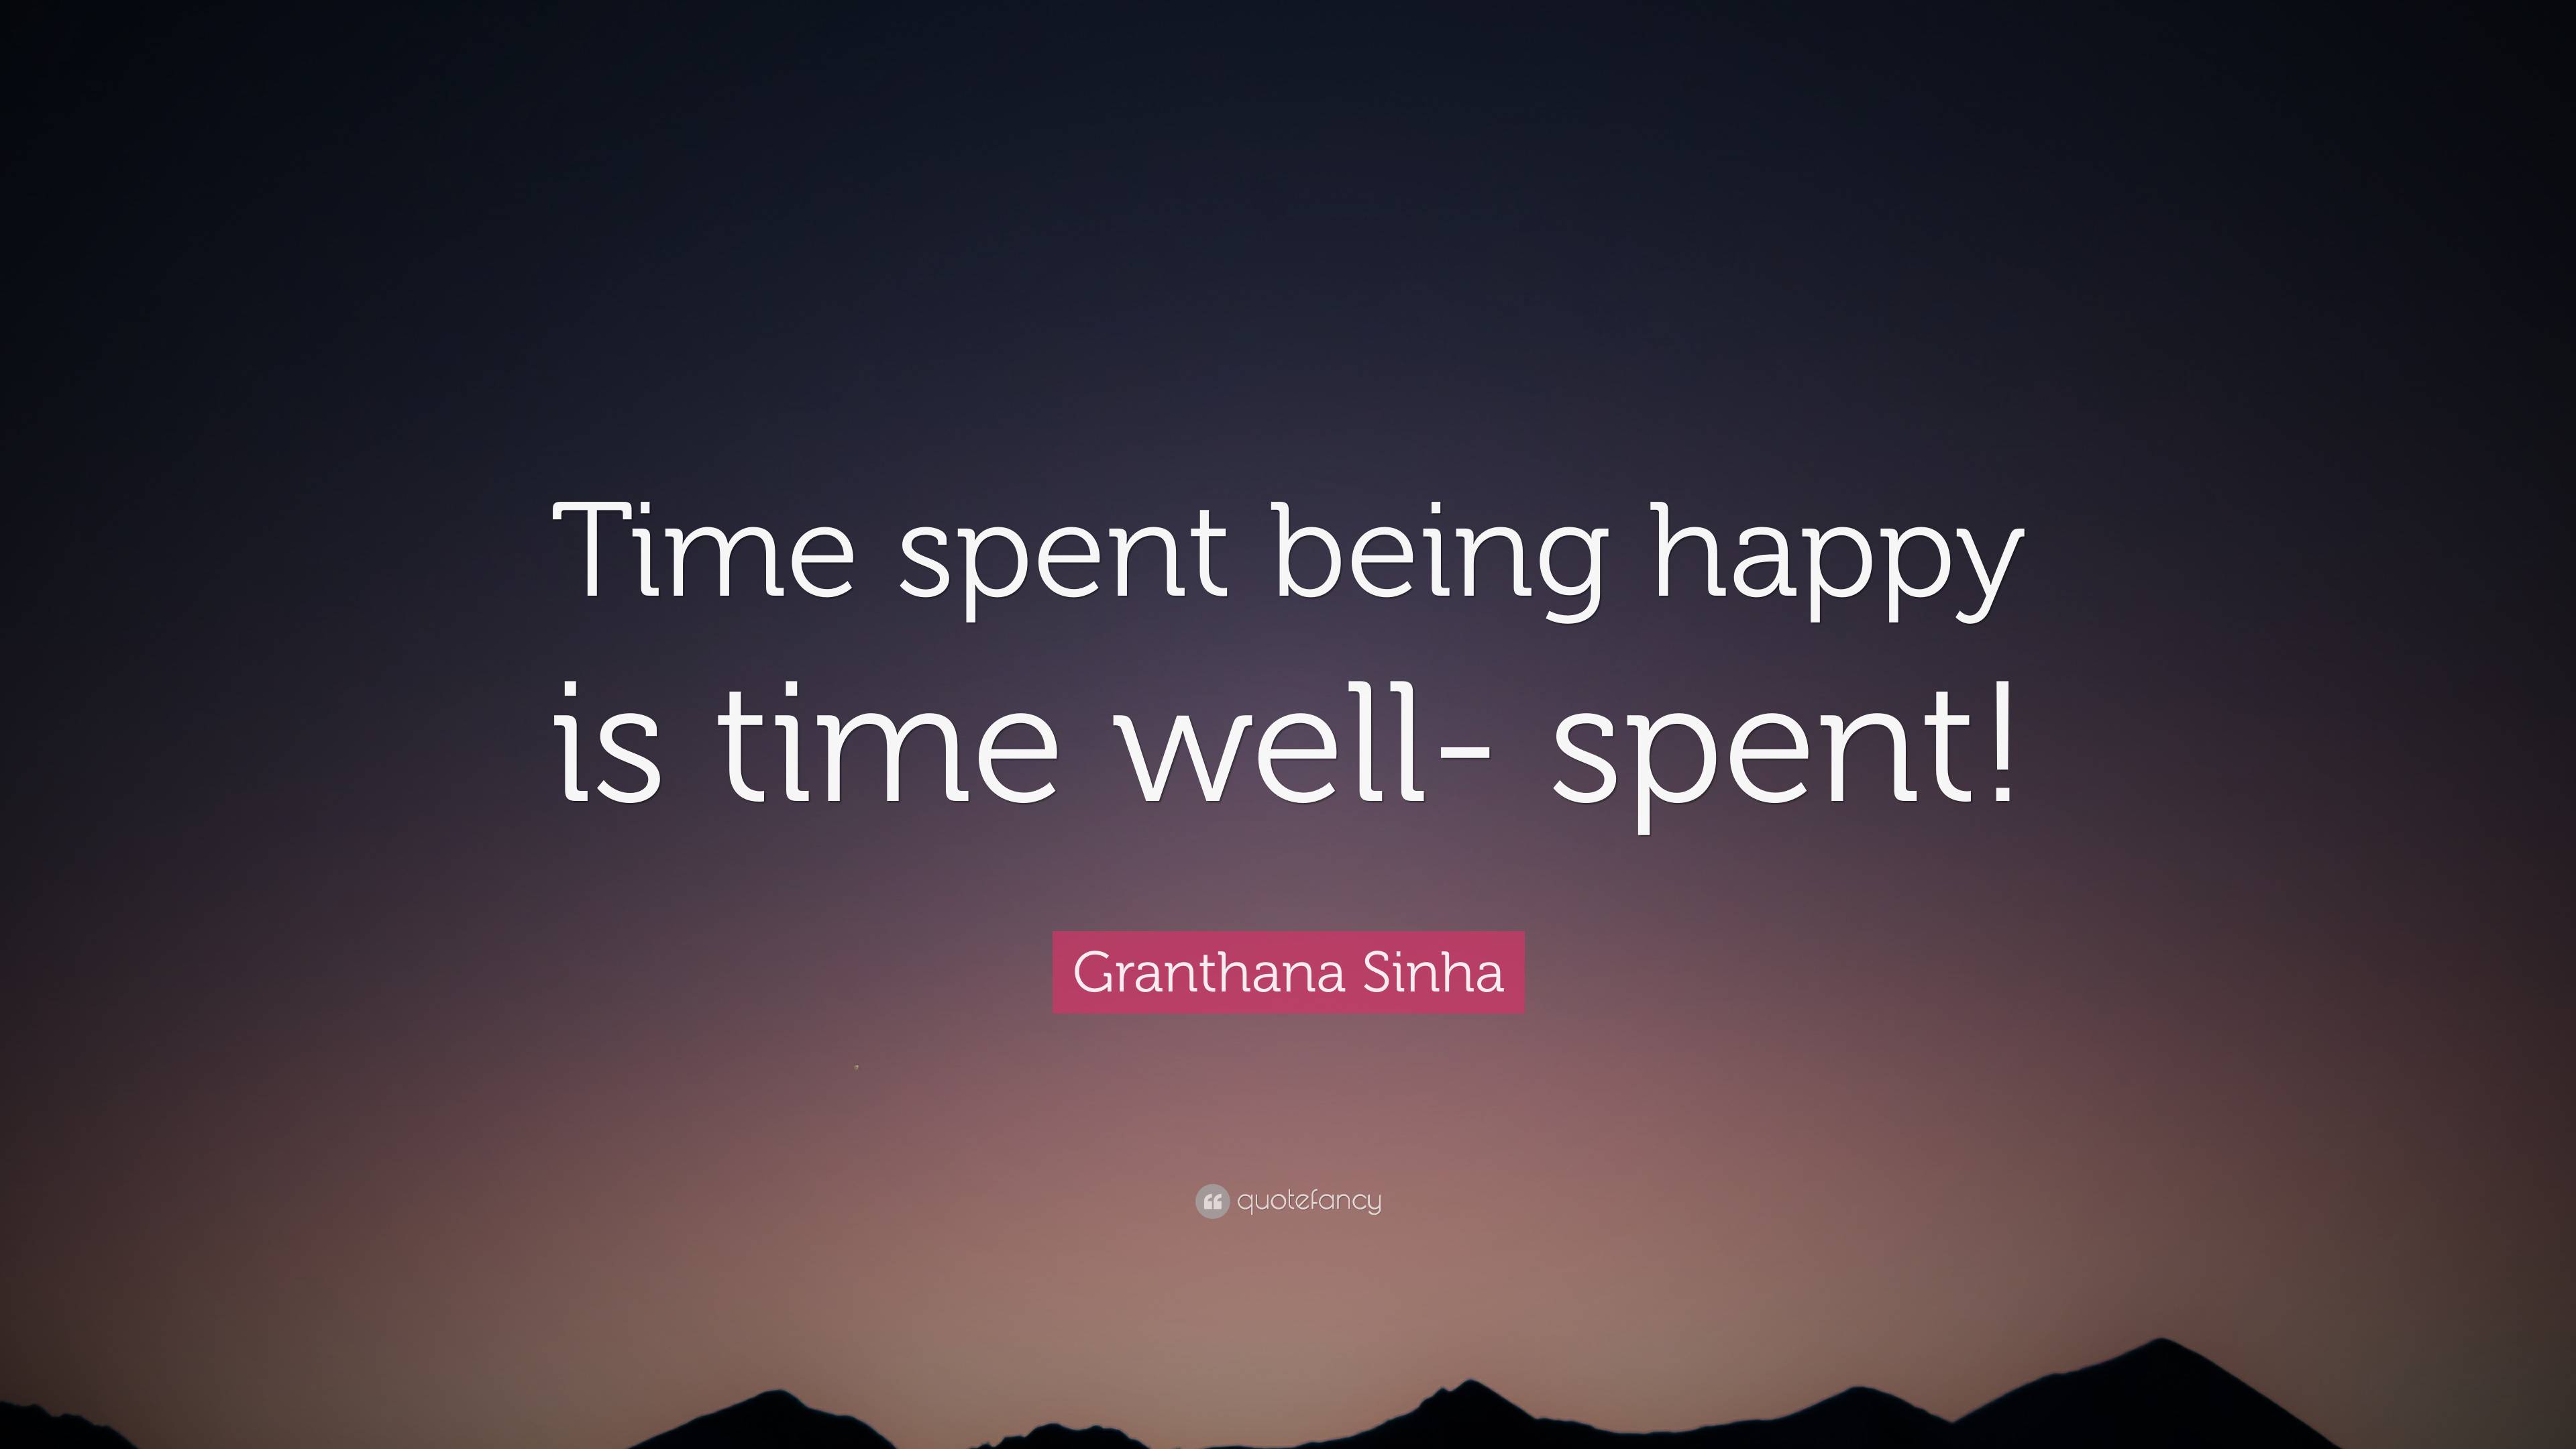 Time Spent Enjoying Life Is Time Well Spent.